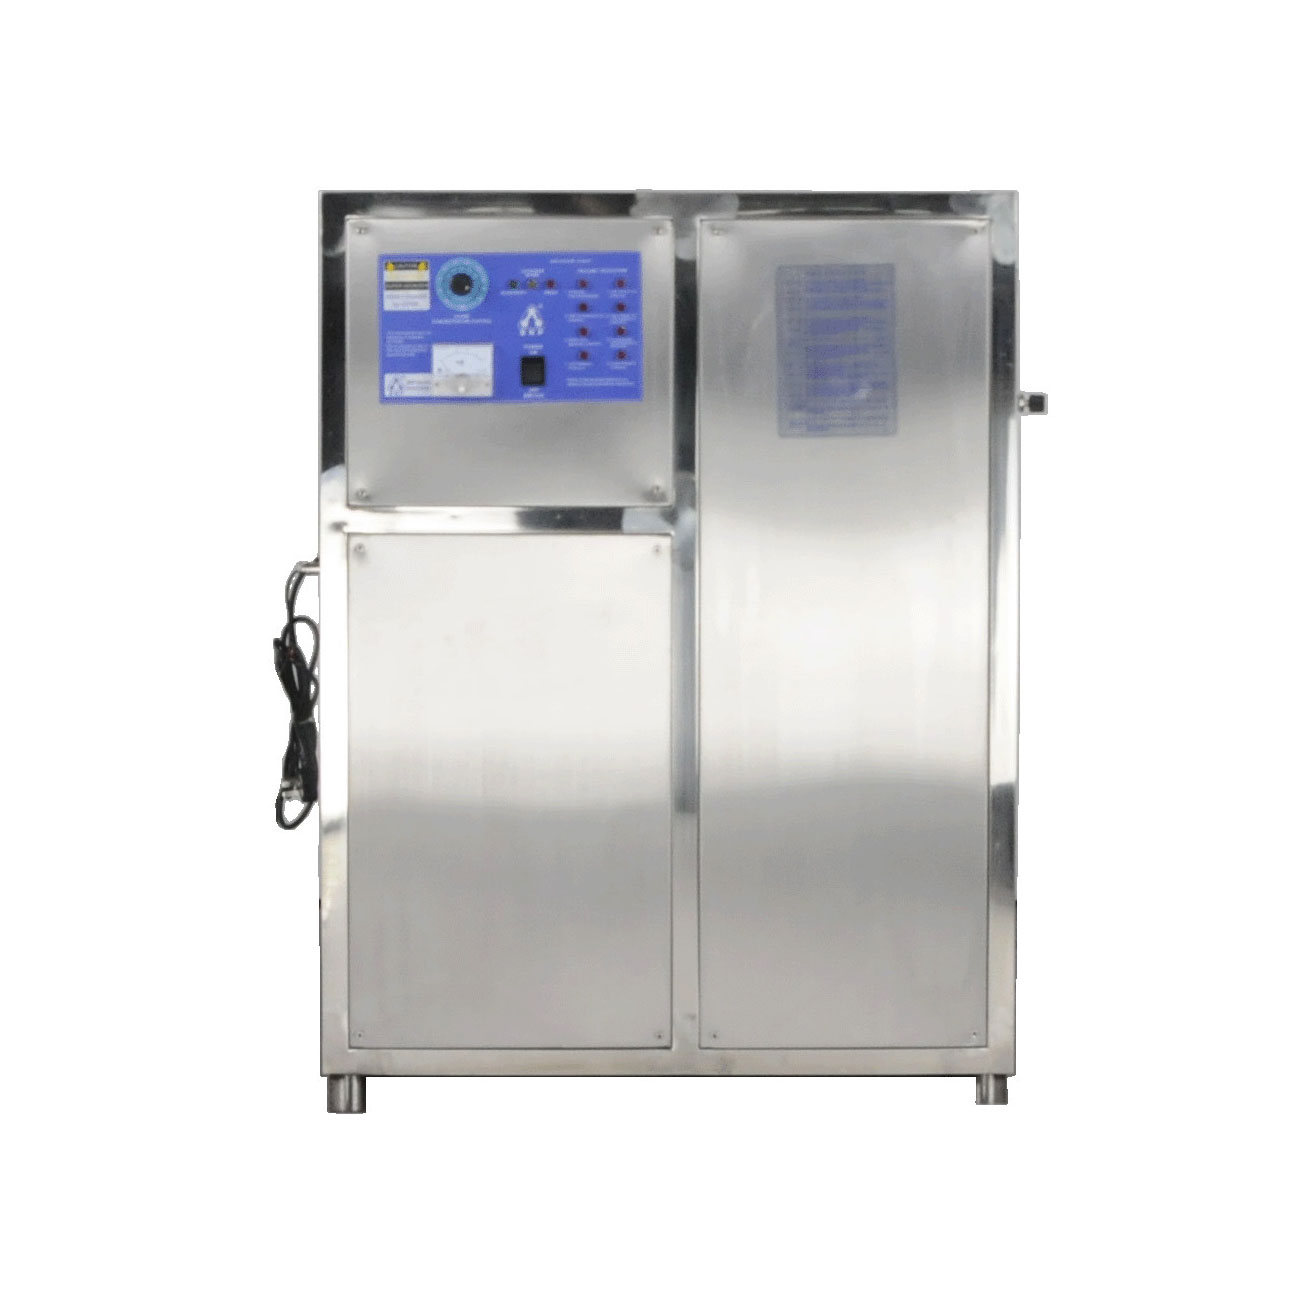 Wholesale Price Bacterial Oxygen Concentrator Filter - Reliable Supplier China BNP SOZ-YW-200G Industrial Oxygen-Enriched Ozone Generator for Public Place Air Purifier and O3 Sterilizer Water Disi...